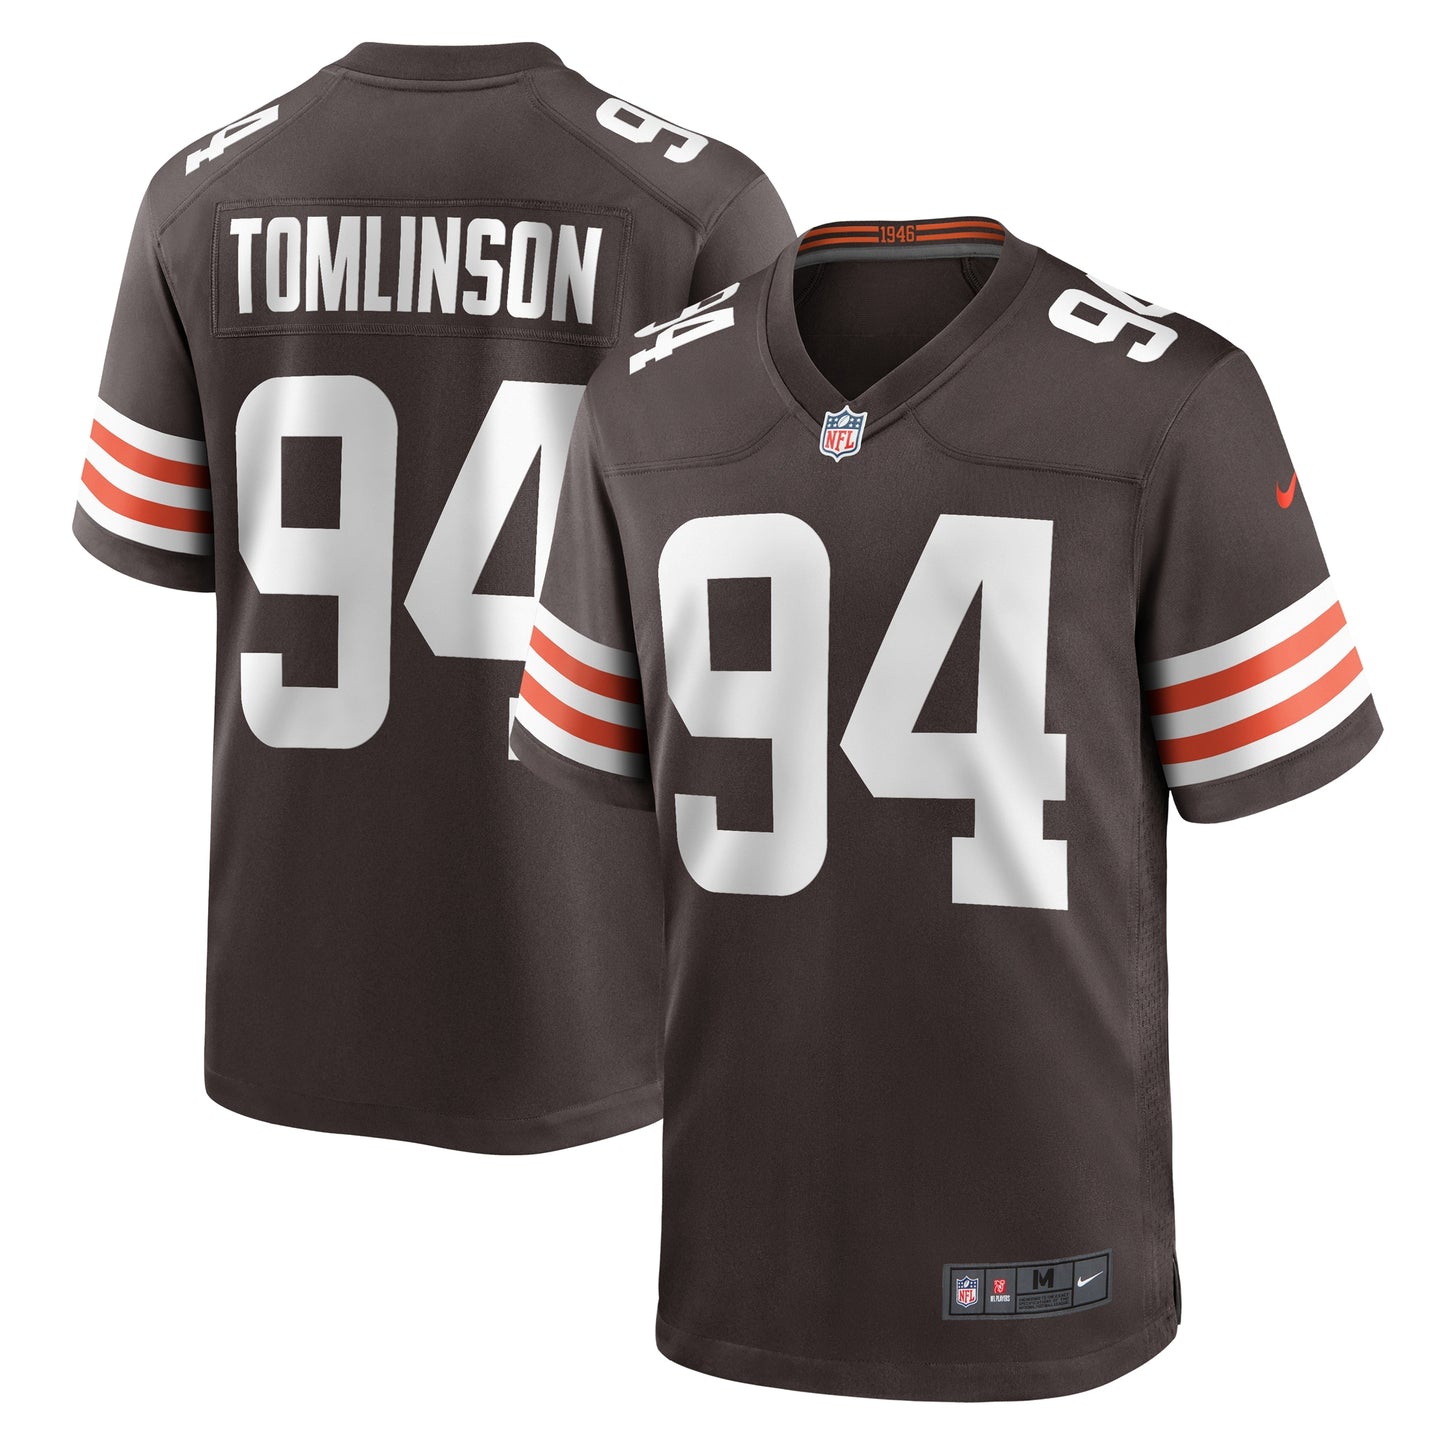 Dalvin Tomlinson Cleveland Browns Nike Game Player Jersey - Brown